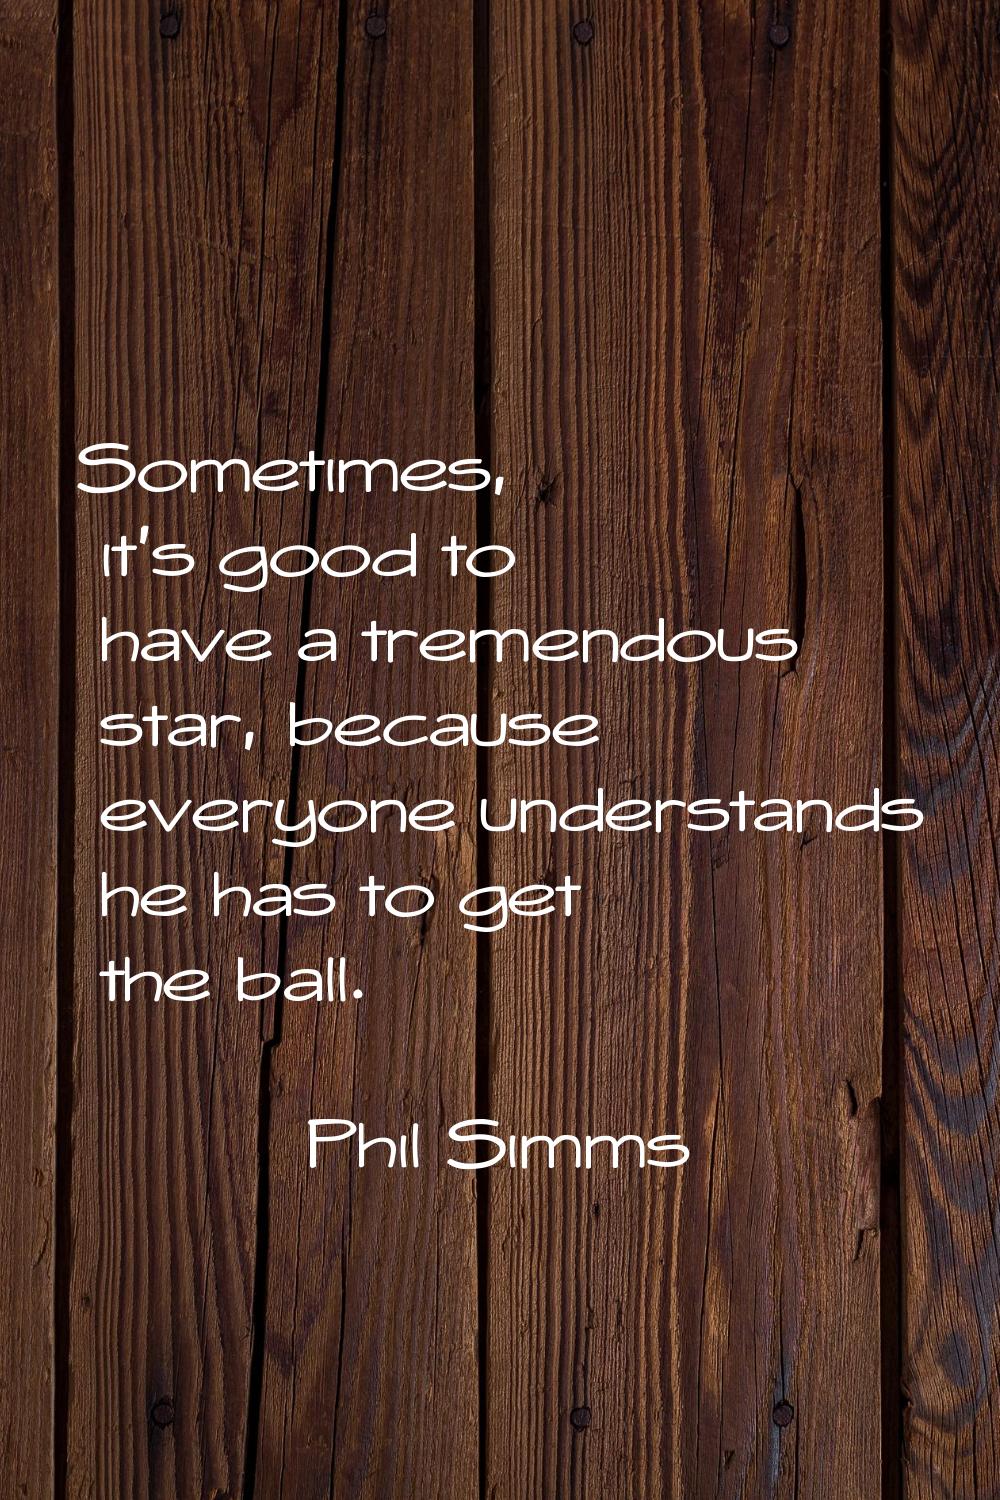 Sometimes, it's good to have a tremendous star, because everyone understands he has to get the ball